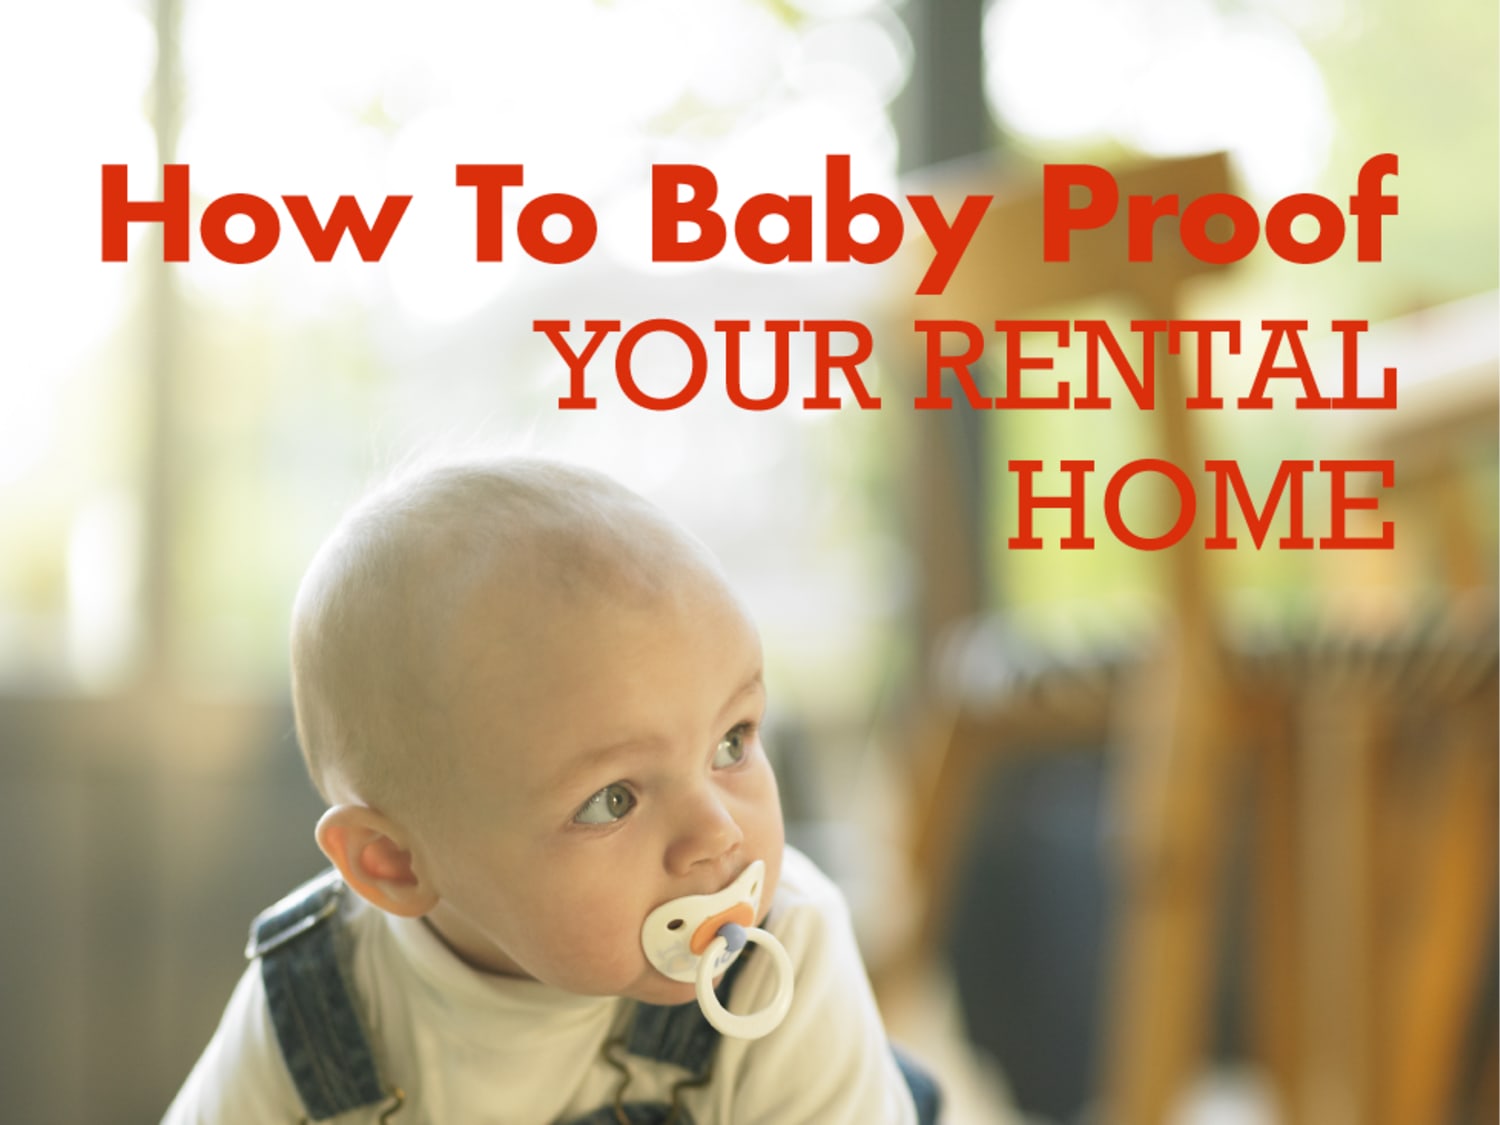 How To Baby Proof Your Rental